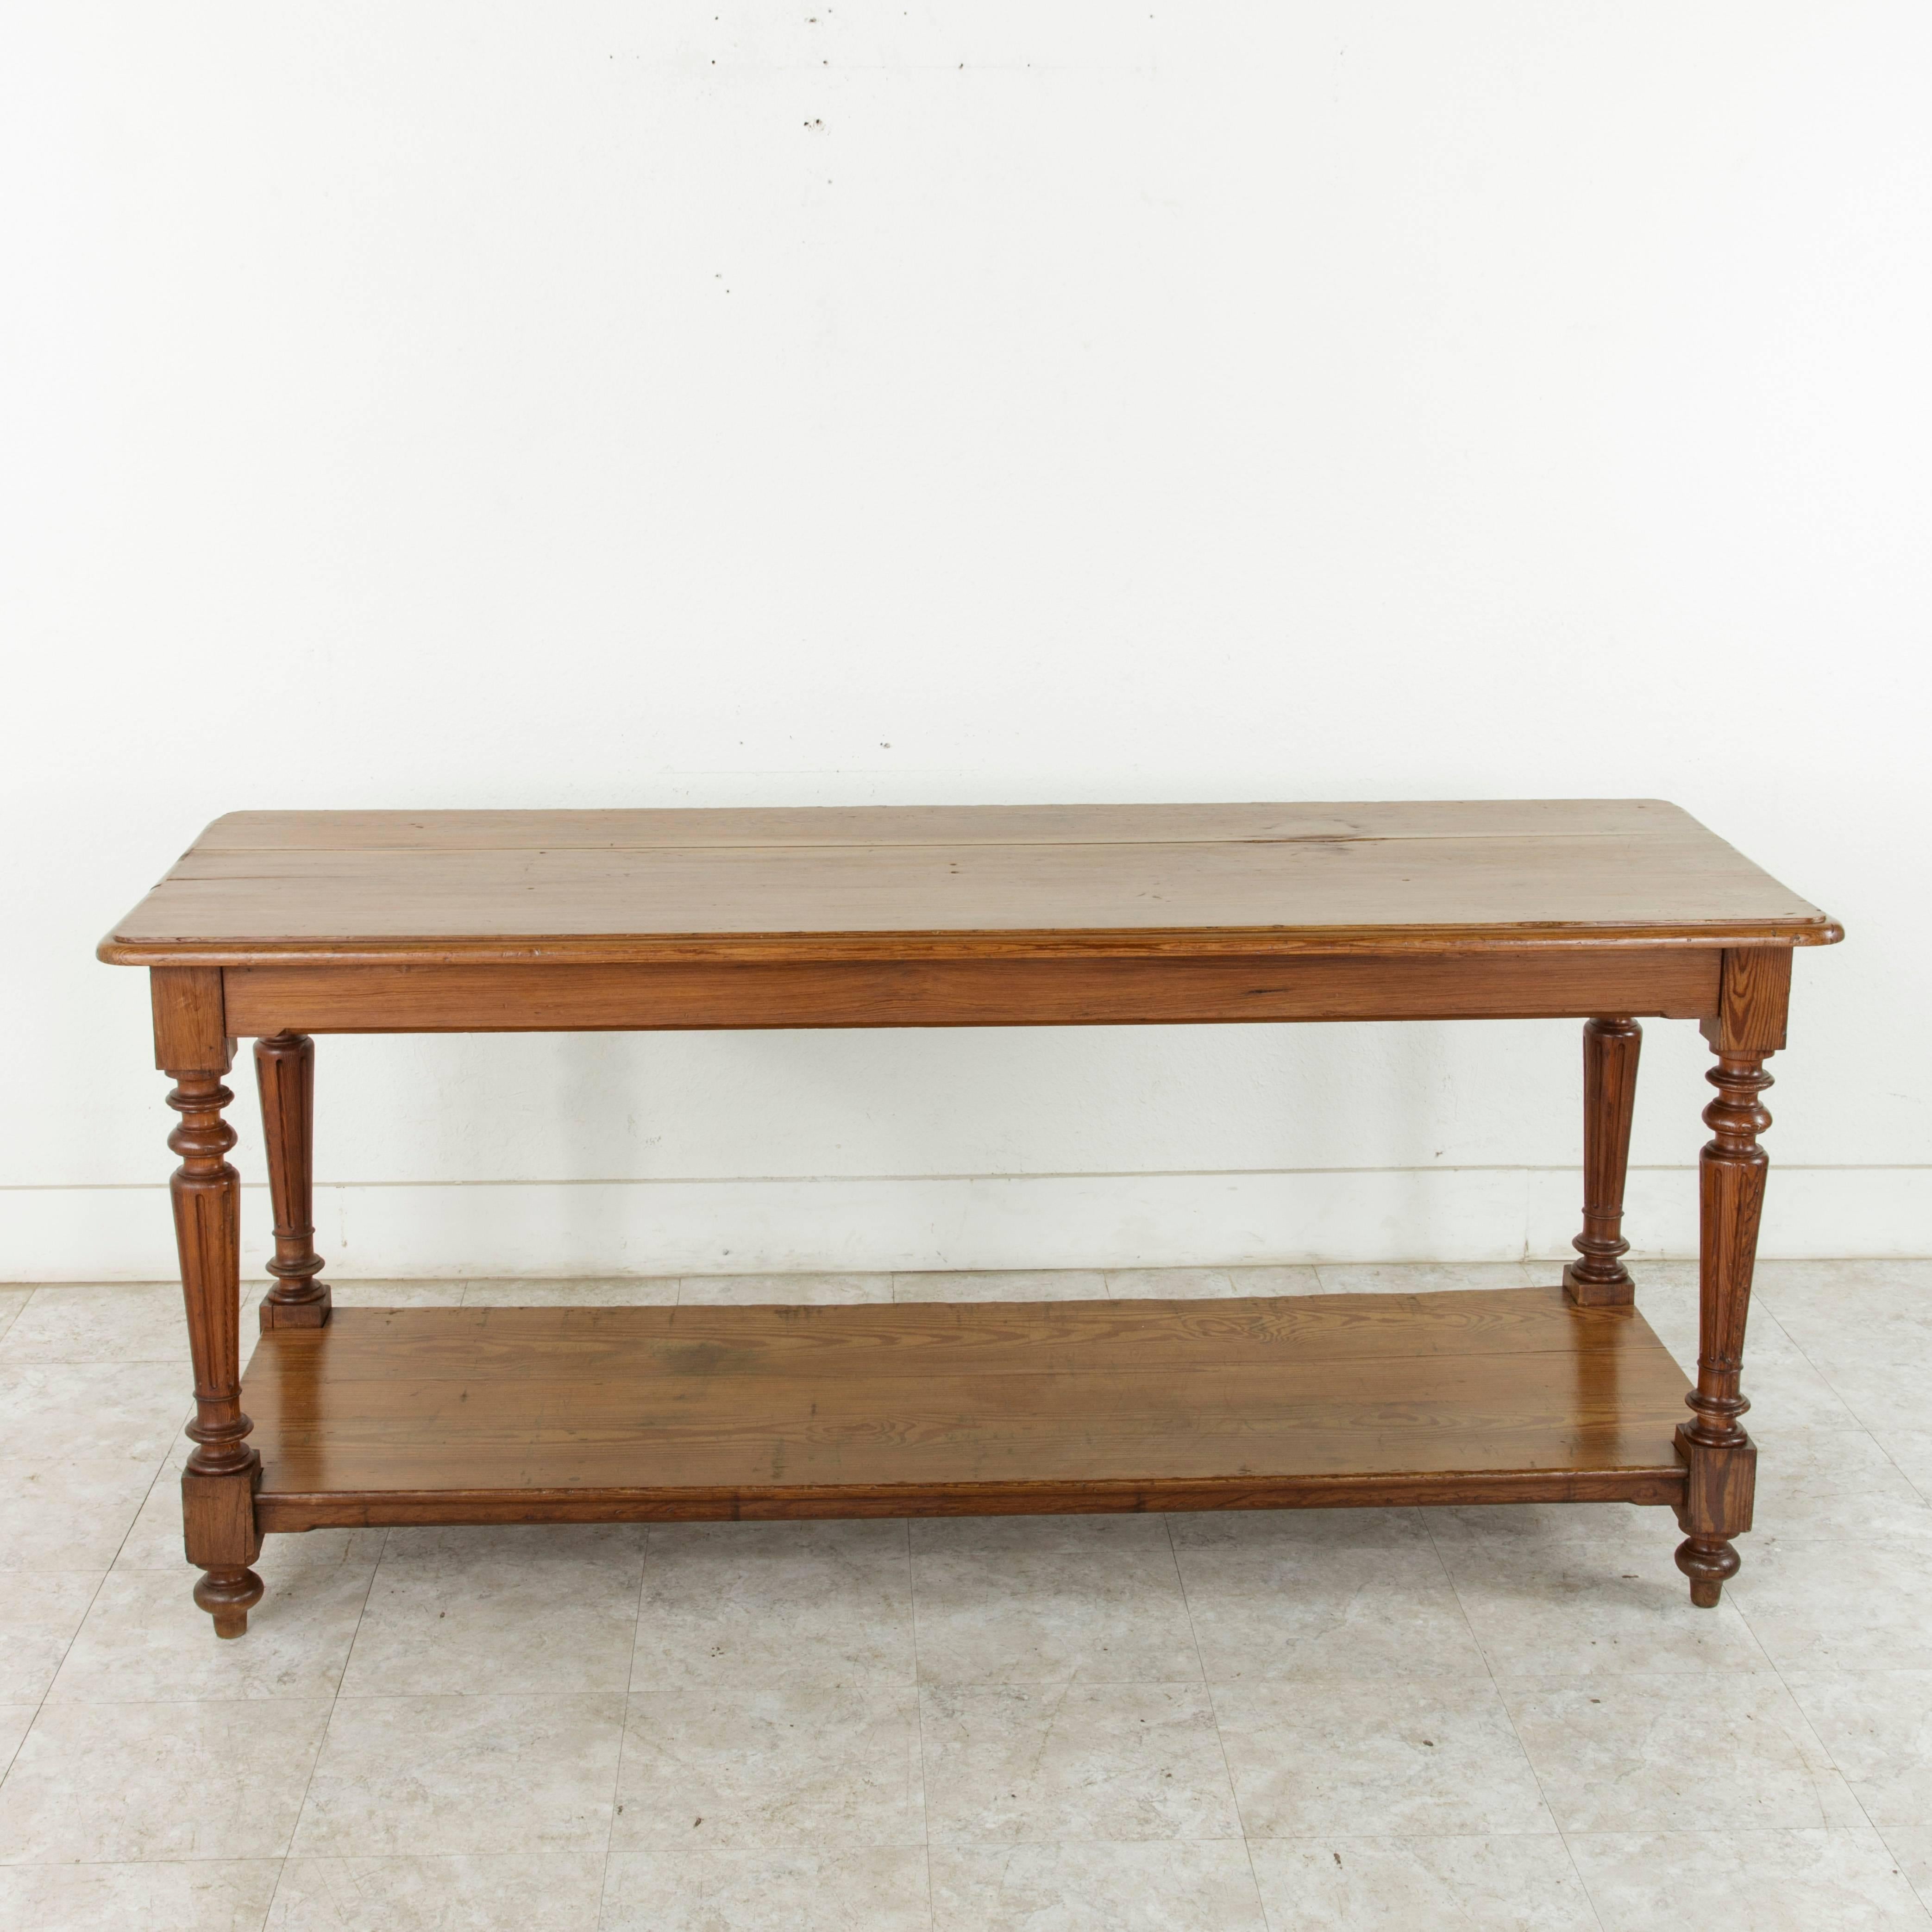 Originally used in a French fabric store to lay out and cut fabric around the turn of the twentieth century, this solid pitch pine fabric presentation table rests on tapered turned and fluted legs which support its lower shelf. The beveled top is